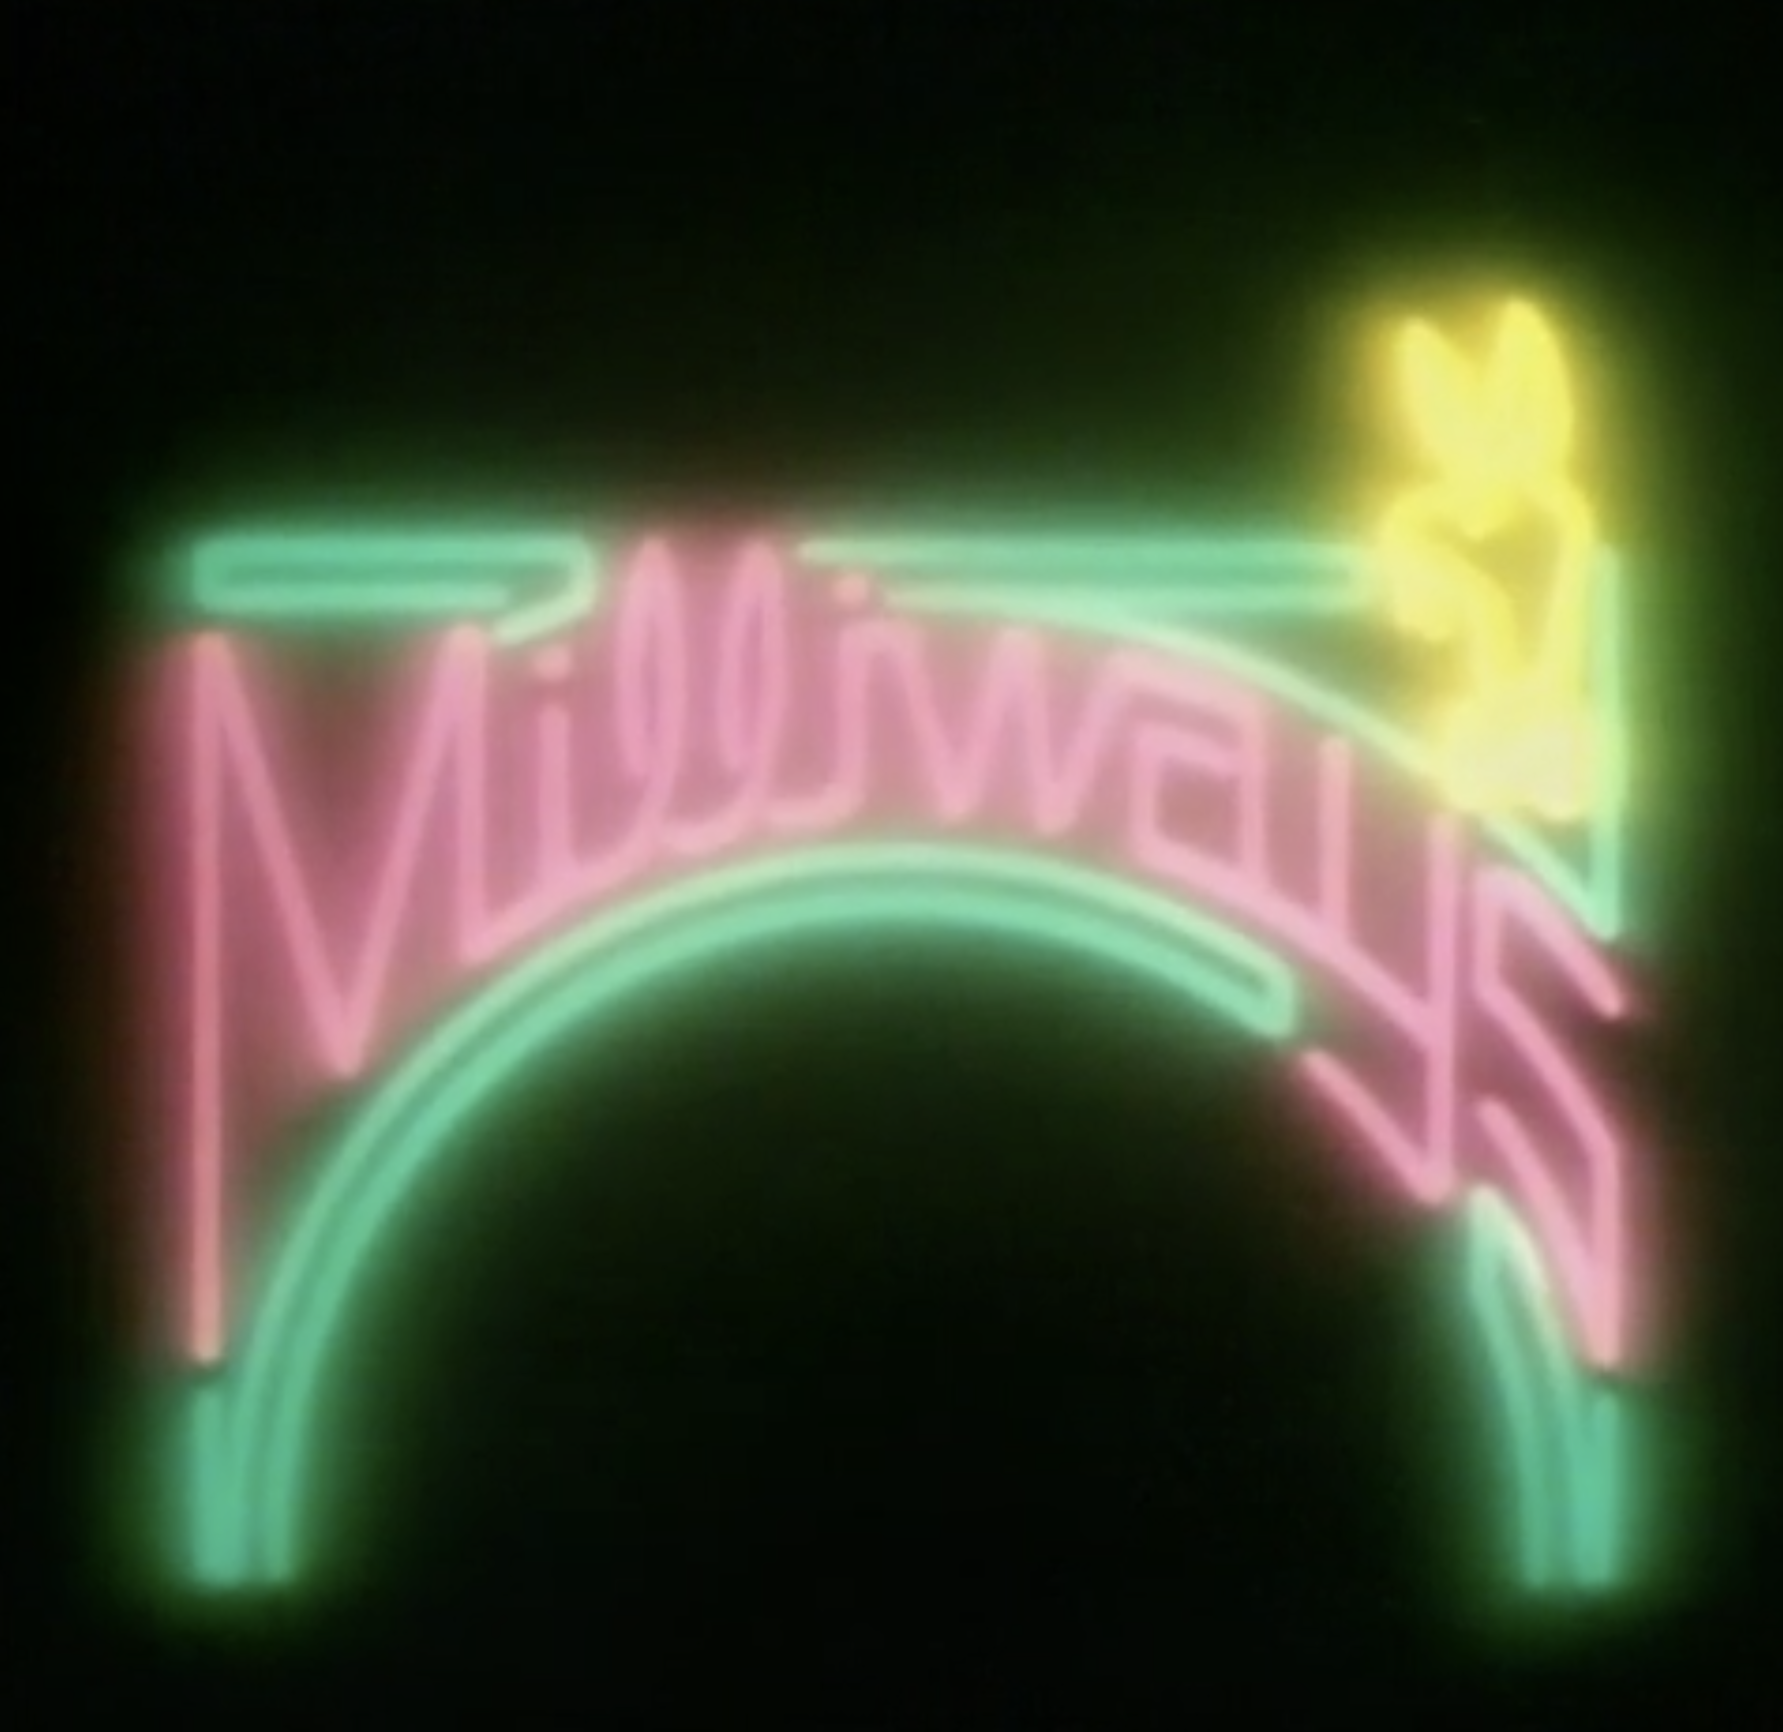 milliways the restaurant at the end of the universe